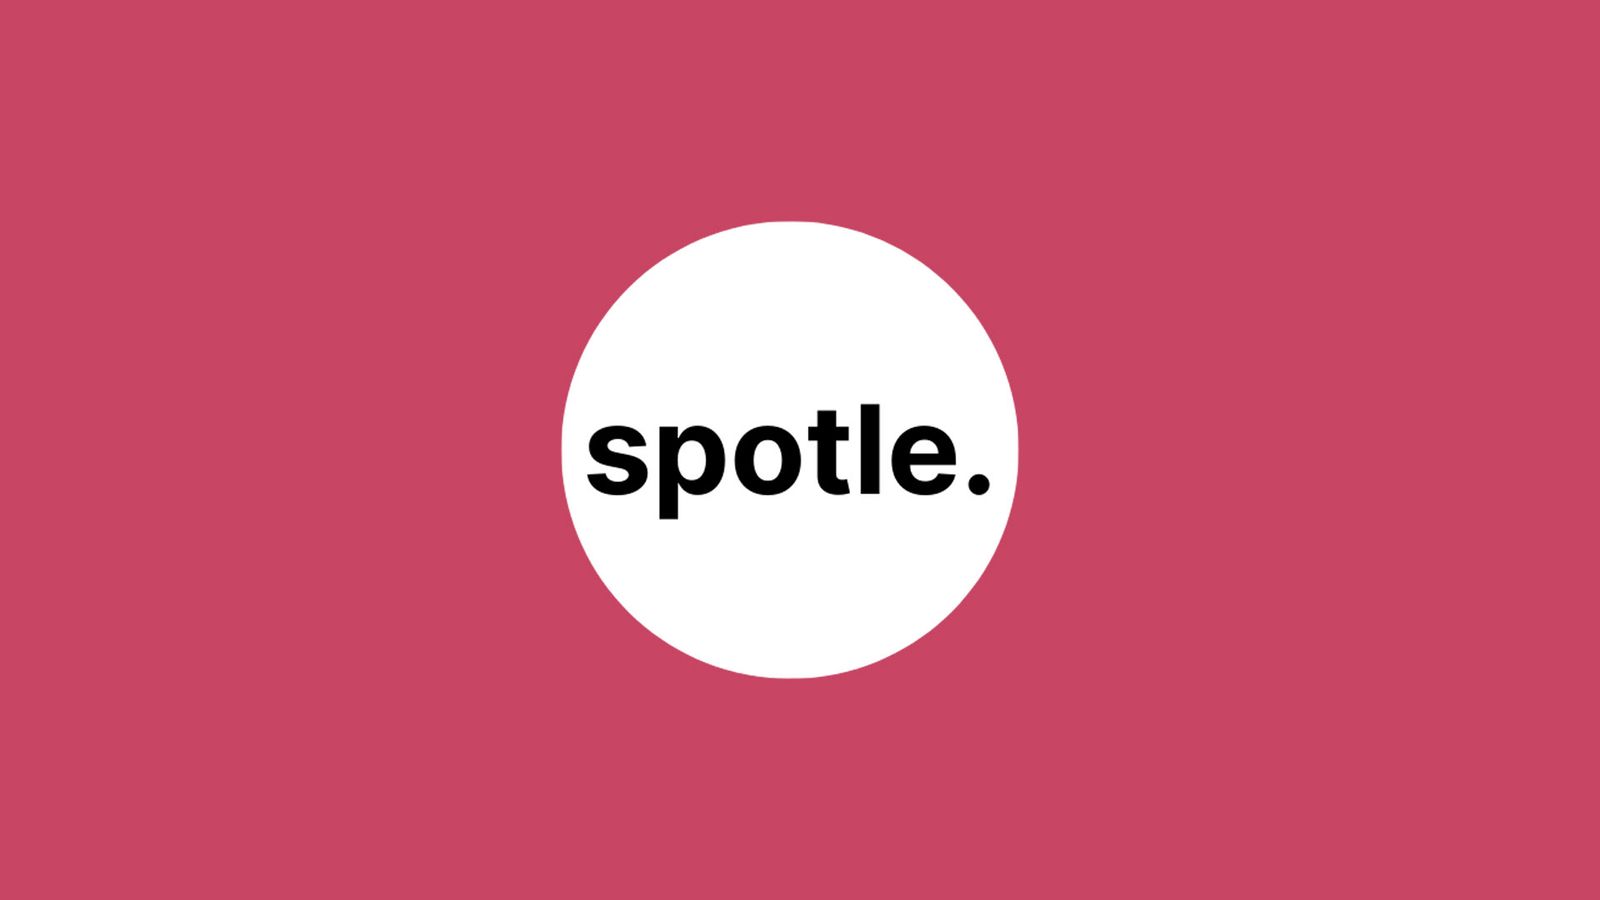 Spotle logo on pale red background